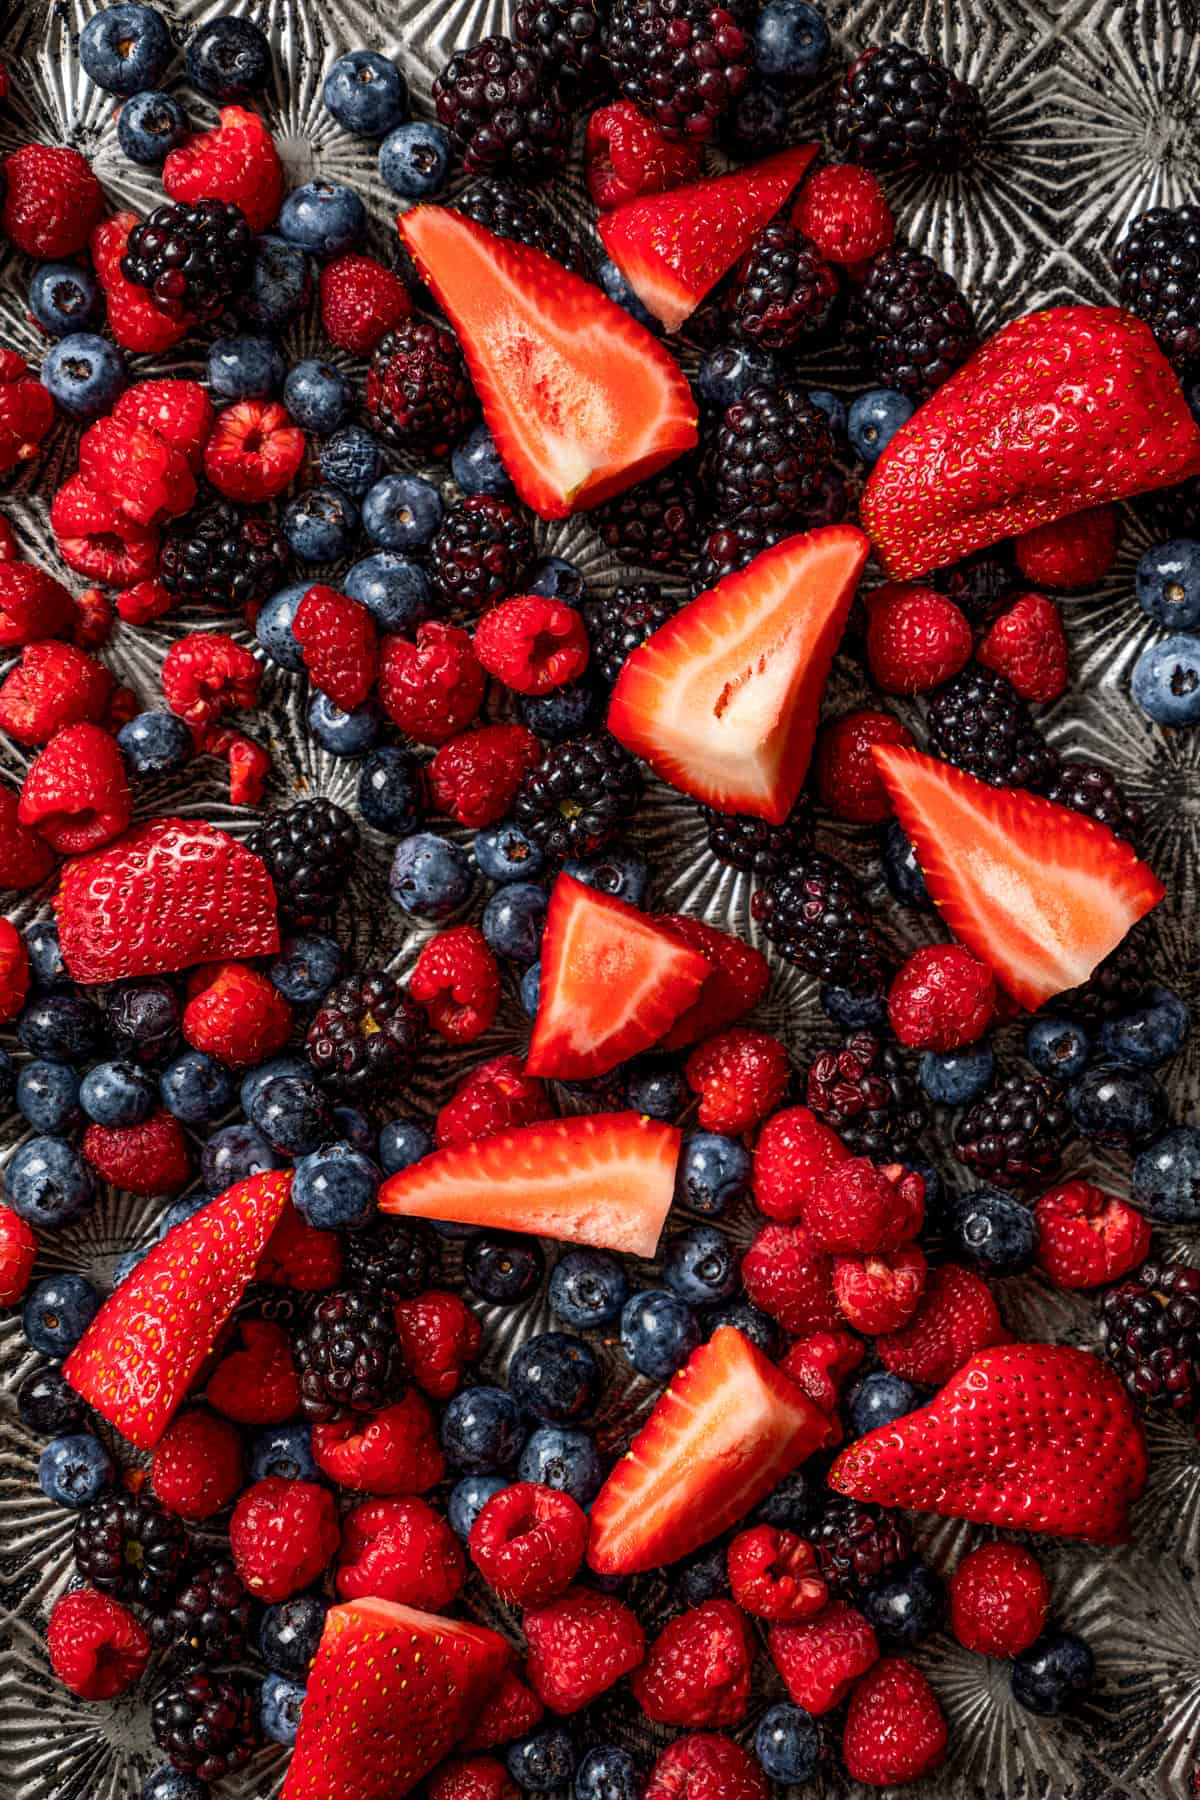 Close-up photo of a bunch of sliced strawberries, blueberries, and raspberries.